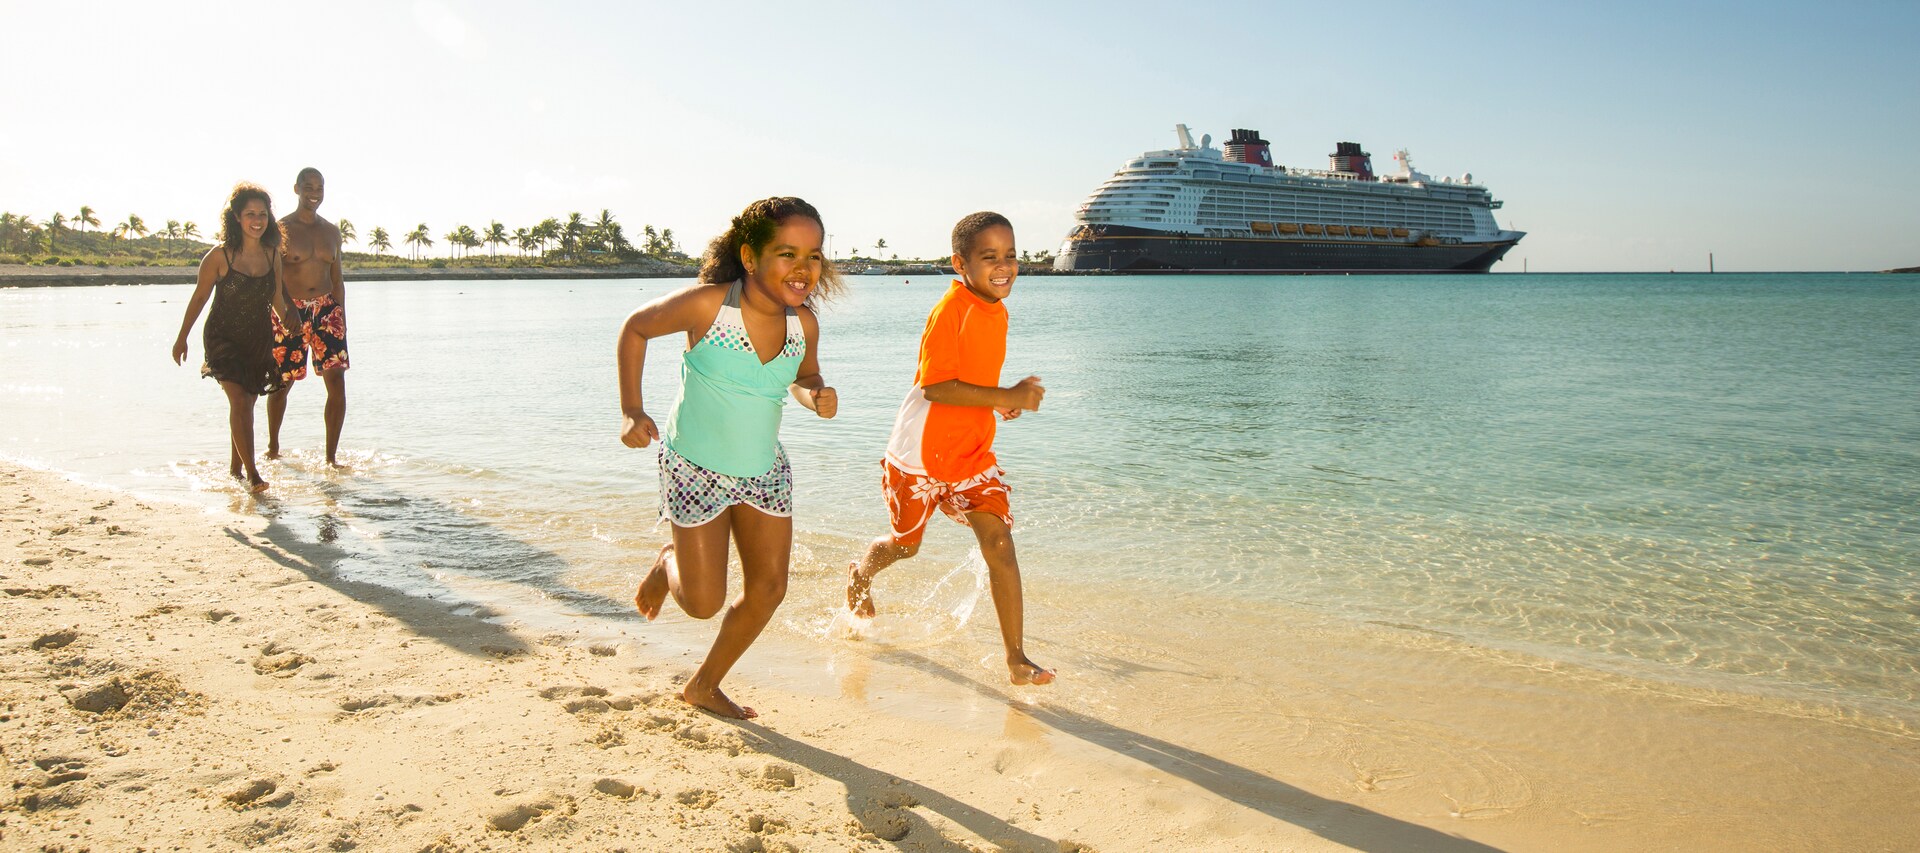 A Disney cruise ship docked next to a tropical island while 2 children run on the beach in front of their smiling parents